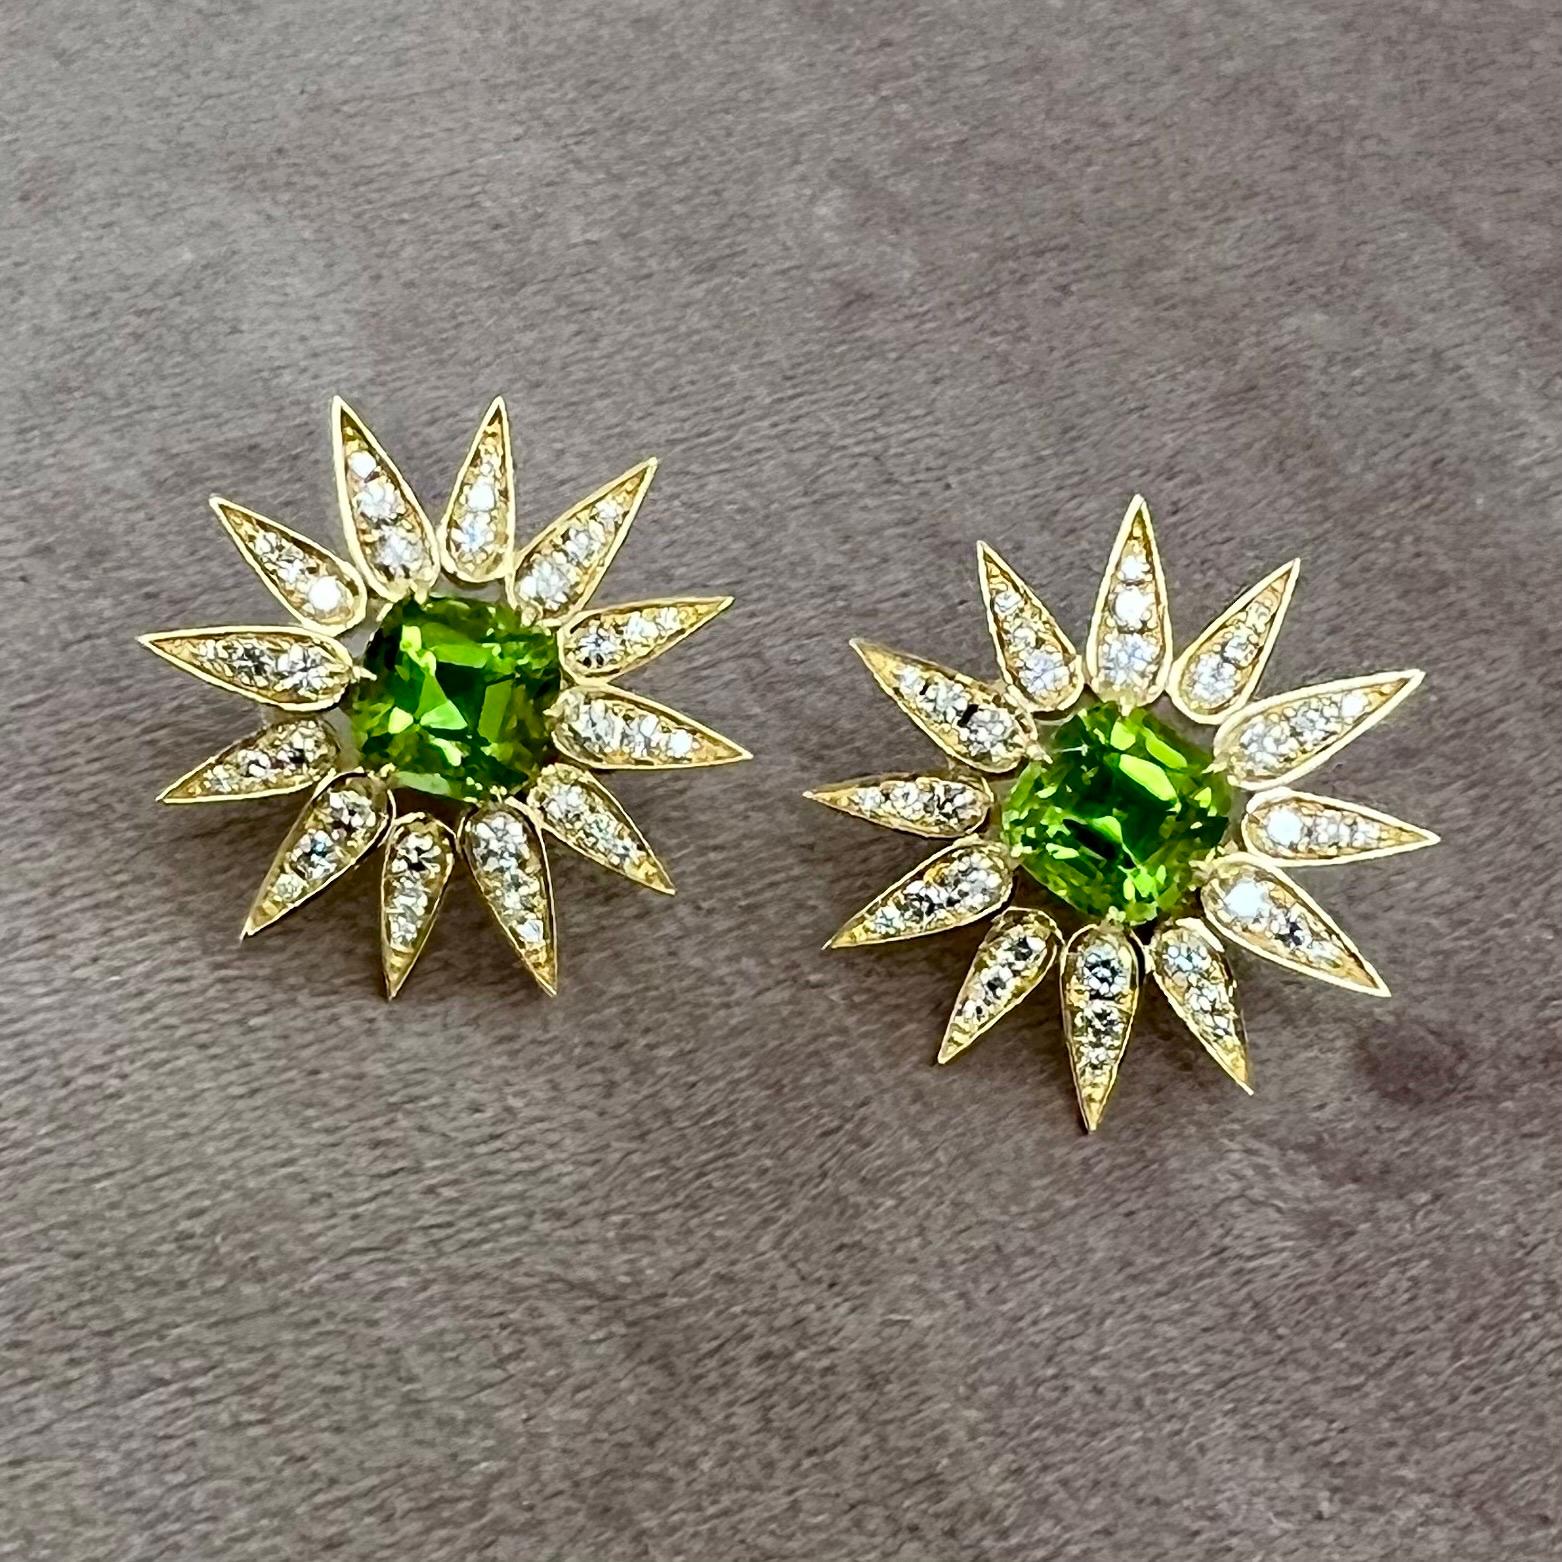 Contemporary Syna Yellow Gold Sunburst Earrings with Peridot and Diamonds